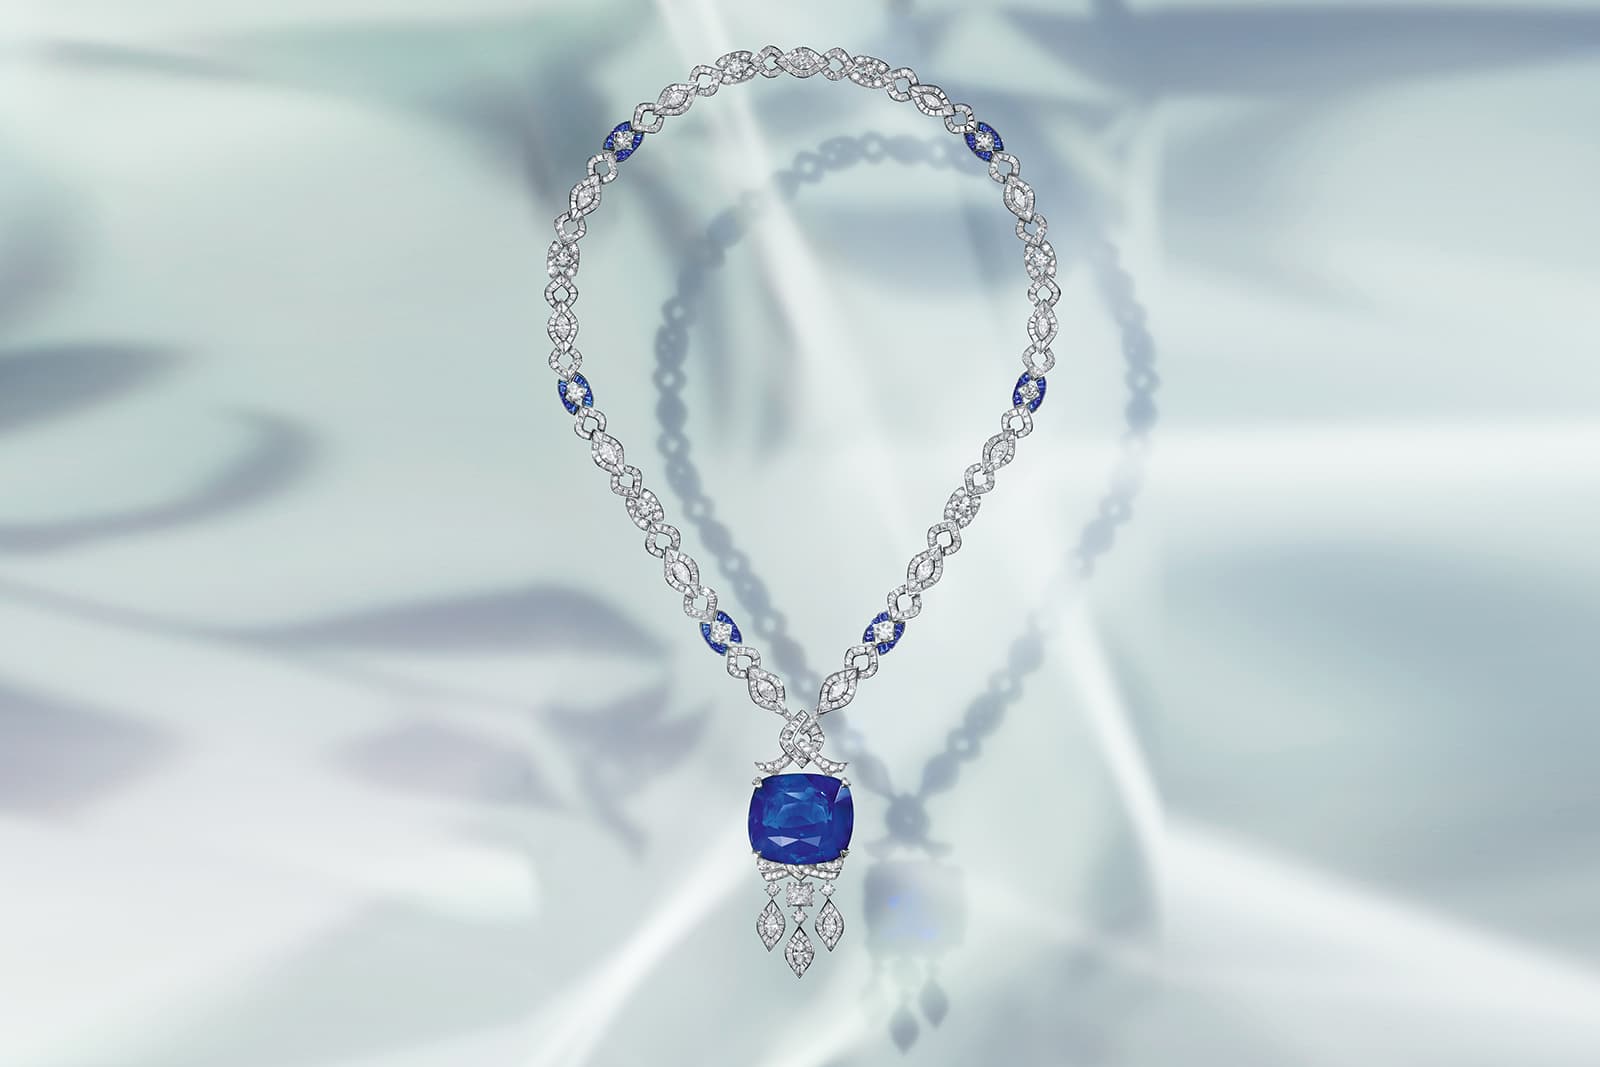 Bulgari Mediterranean Reverie necklace with a 107.15 carat royal blue Sri Lankan sapphire from the Eden The Garden of Wonders High Jewellery collection